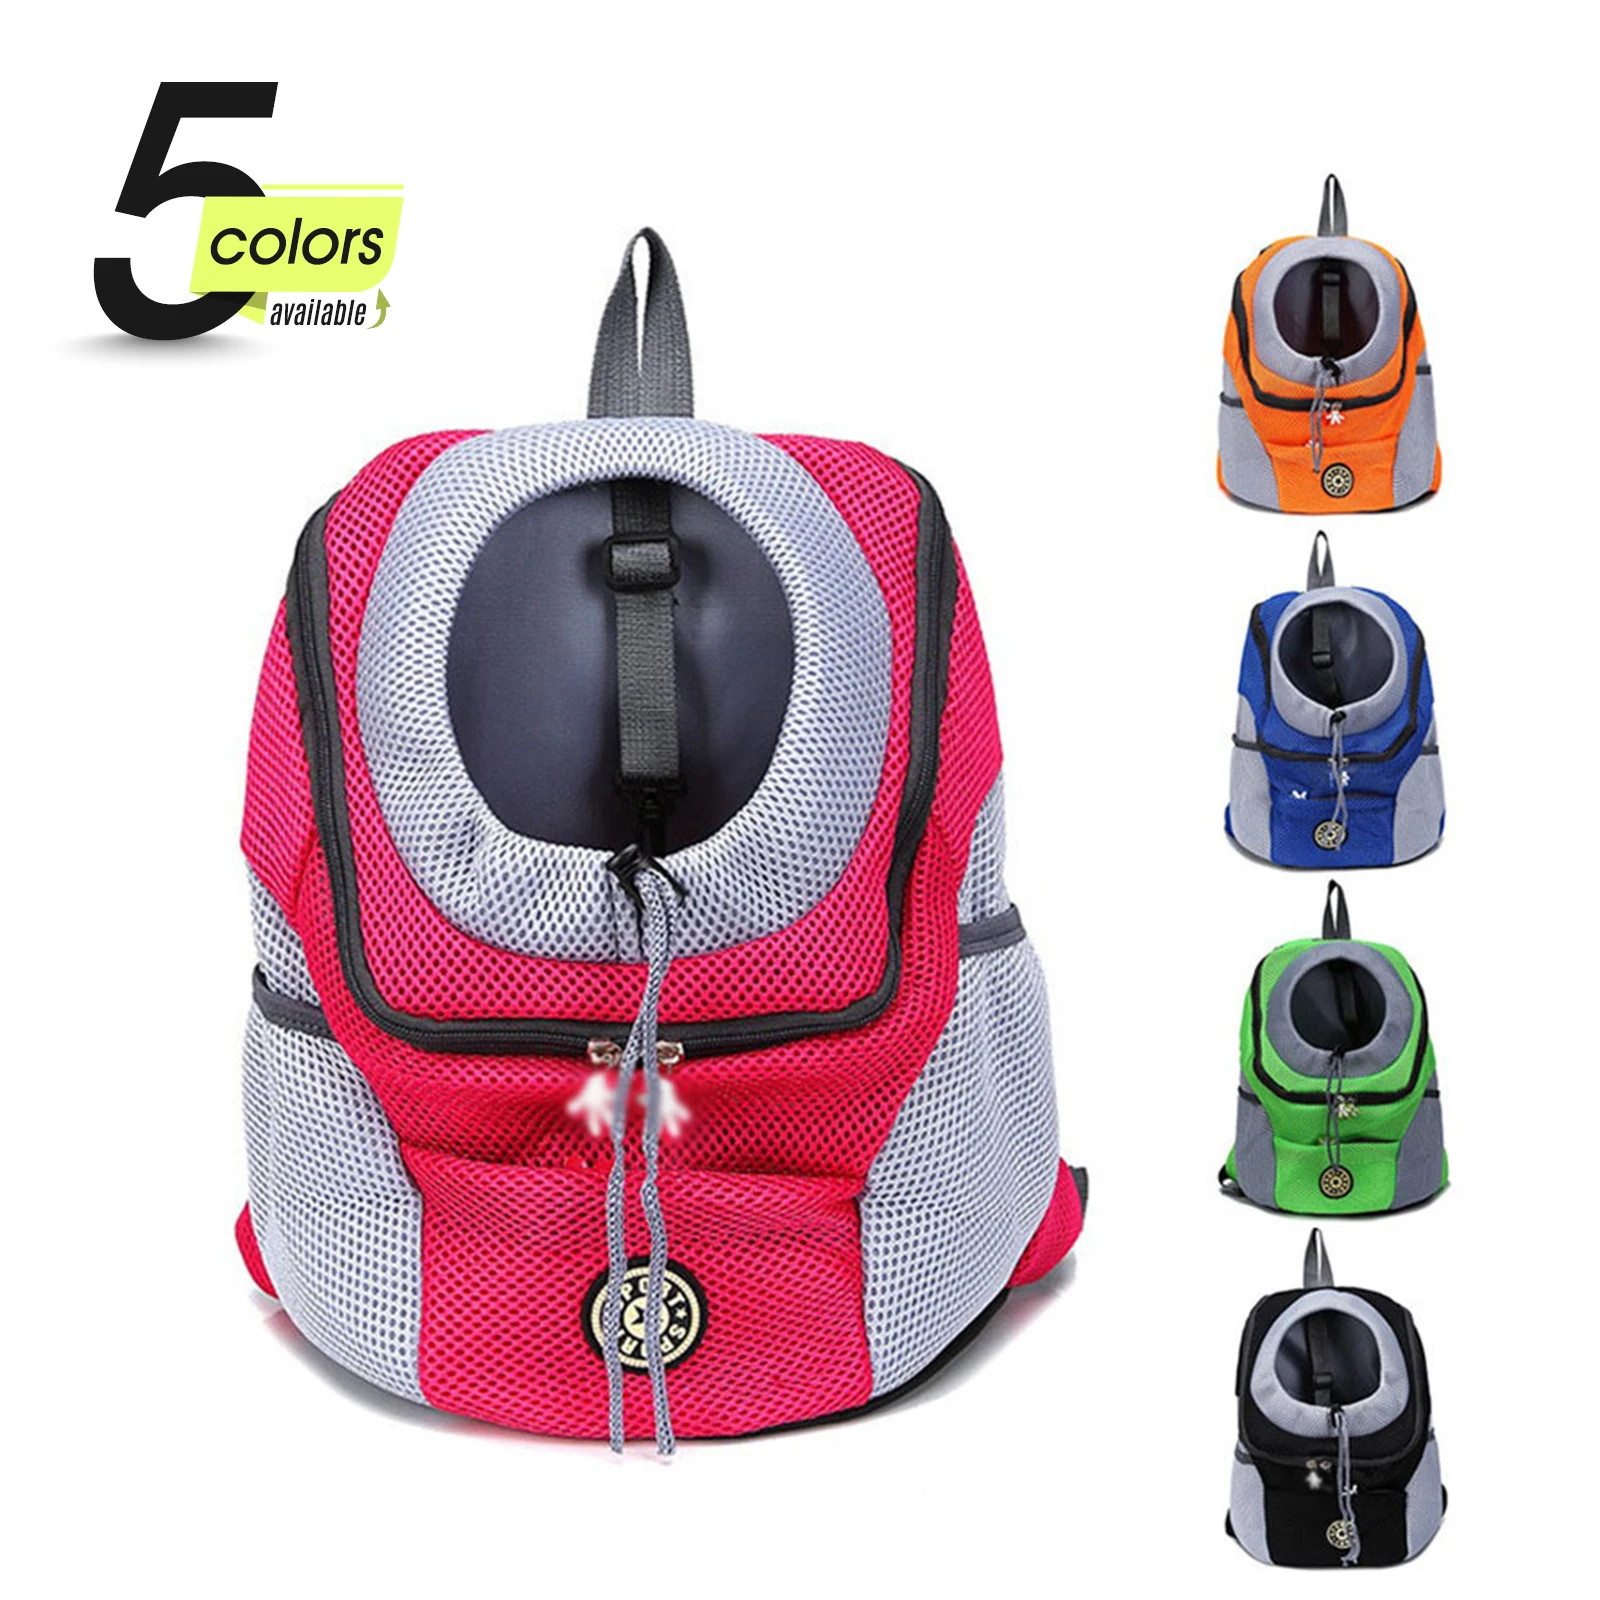 Pet Dog Carrier Backpack with Breathable Puppy Dog Carrier Front Pack Small Medium Dogs Cats Rabbits for Travel Hiking Outdoor